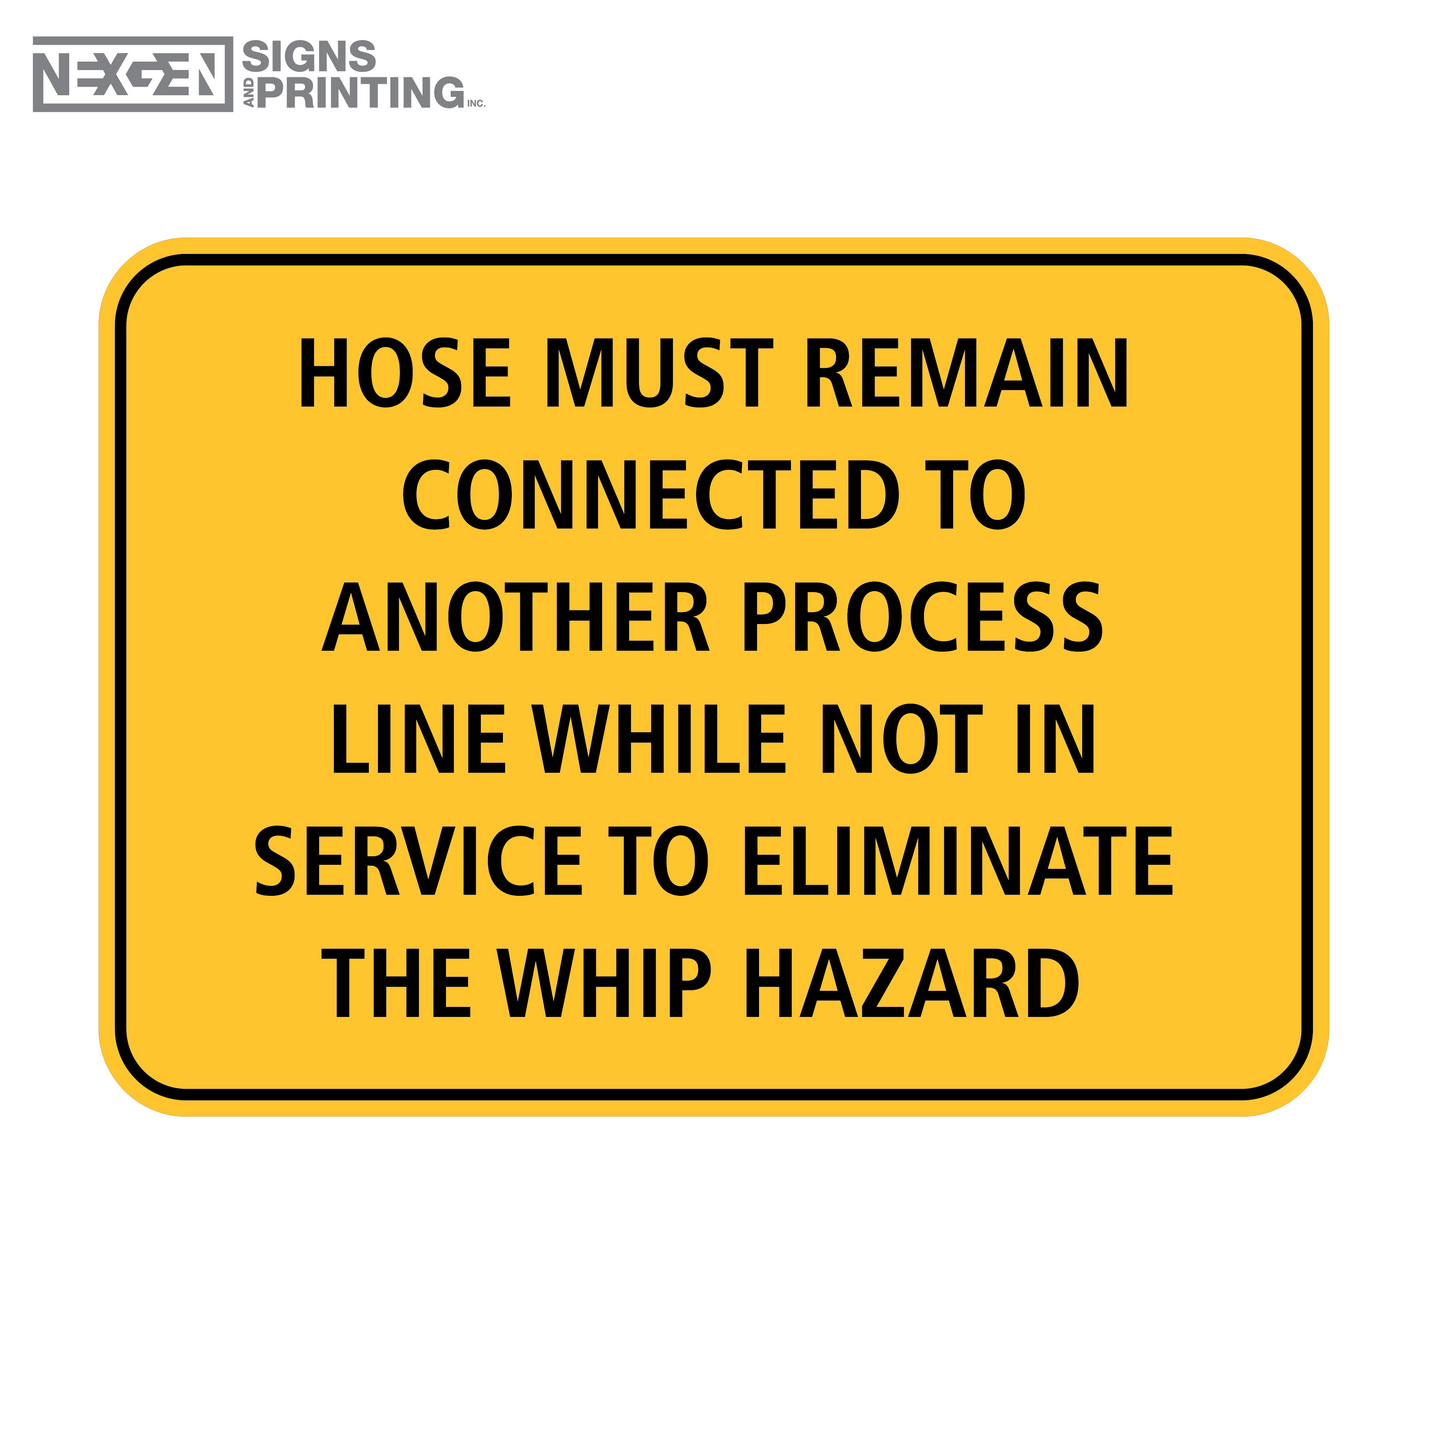 NEX-1 Hose Must Remain Connected